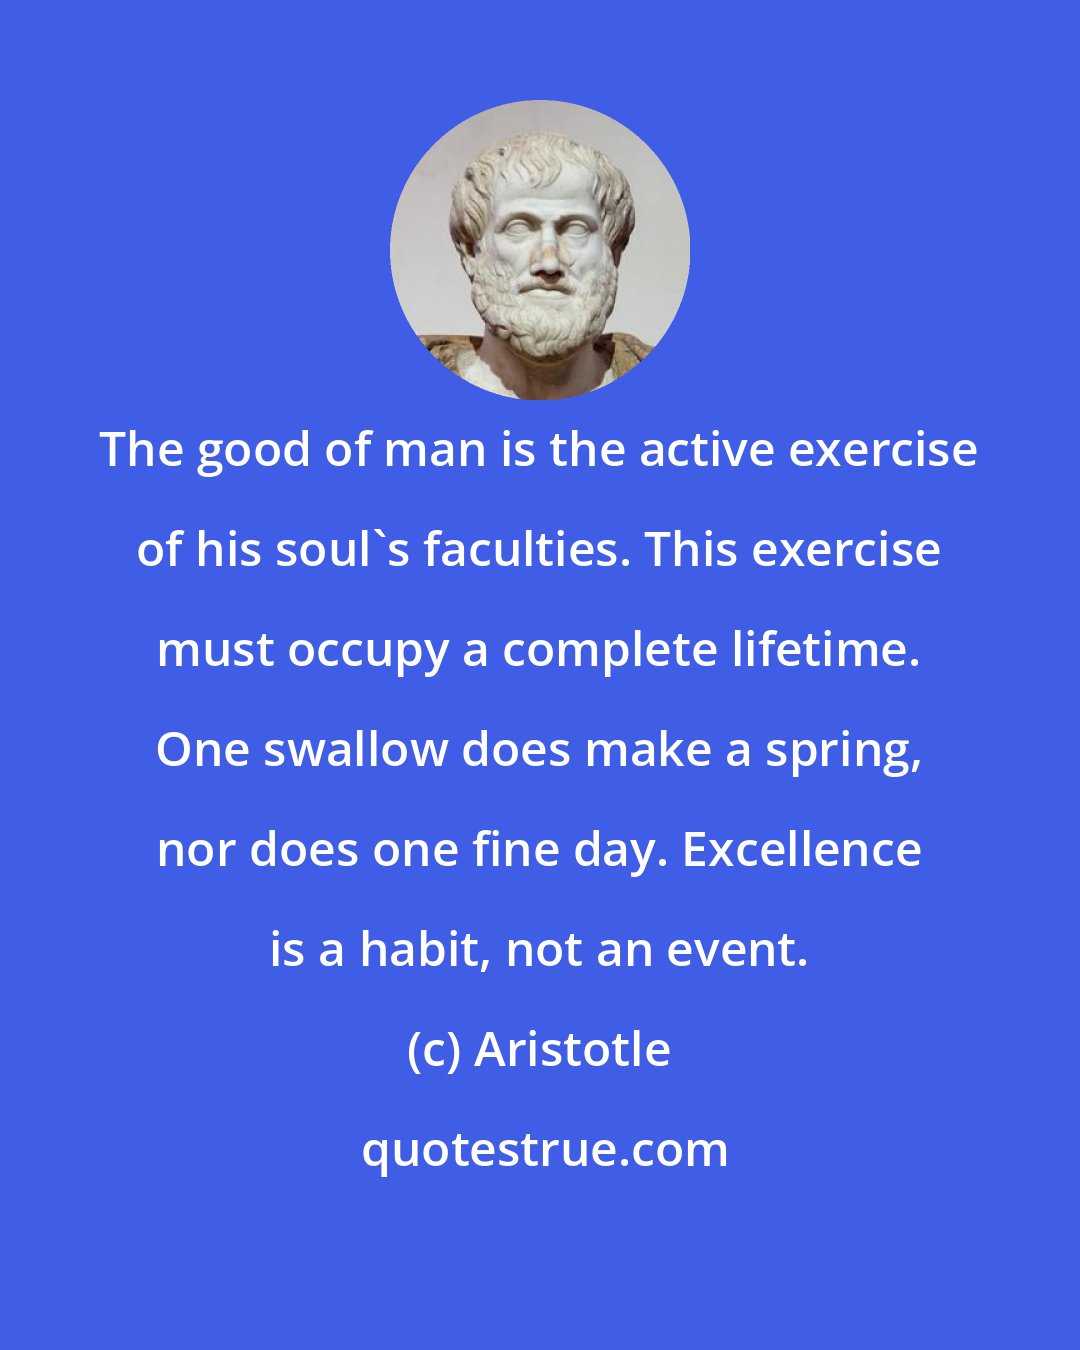 Aristotle: The good of man is the active exercise of his soul's faculties. This exercise must occupy a complete lifetime. One swallow does make a spring, nor does one fine day. Excellence is a habit, not an event.